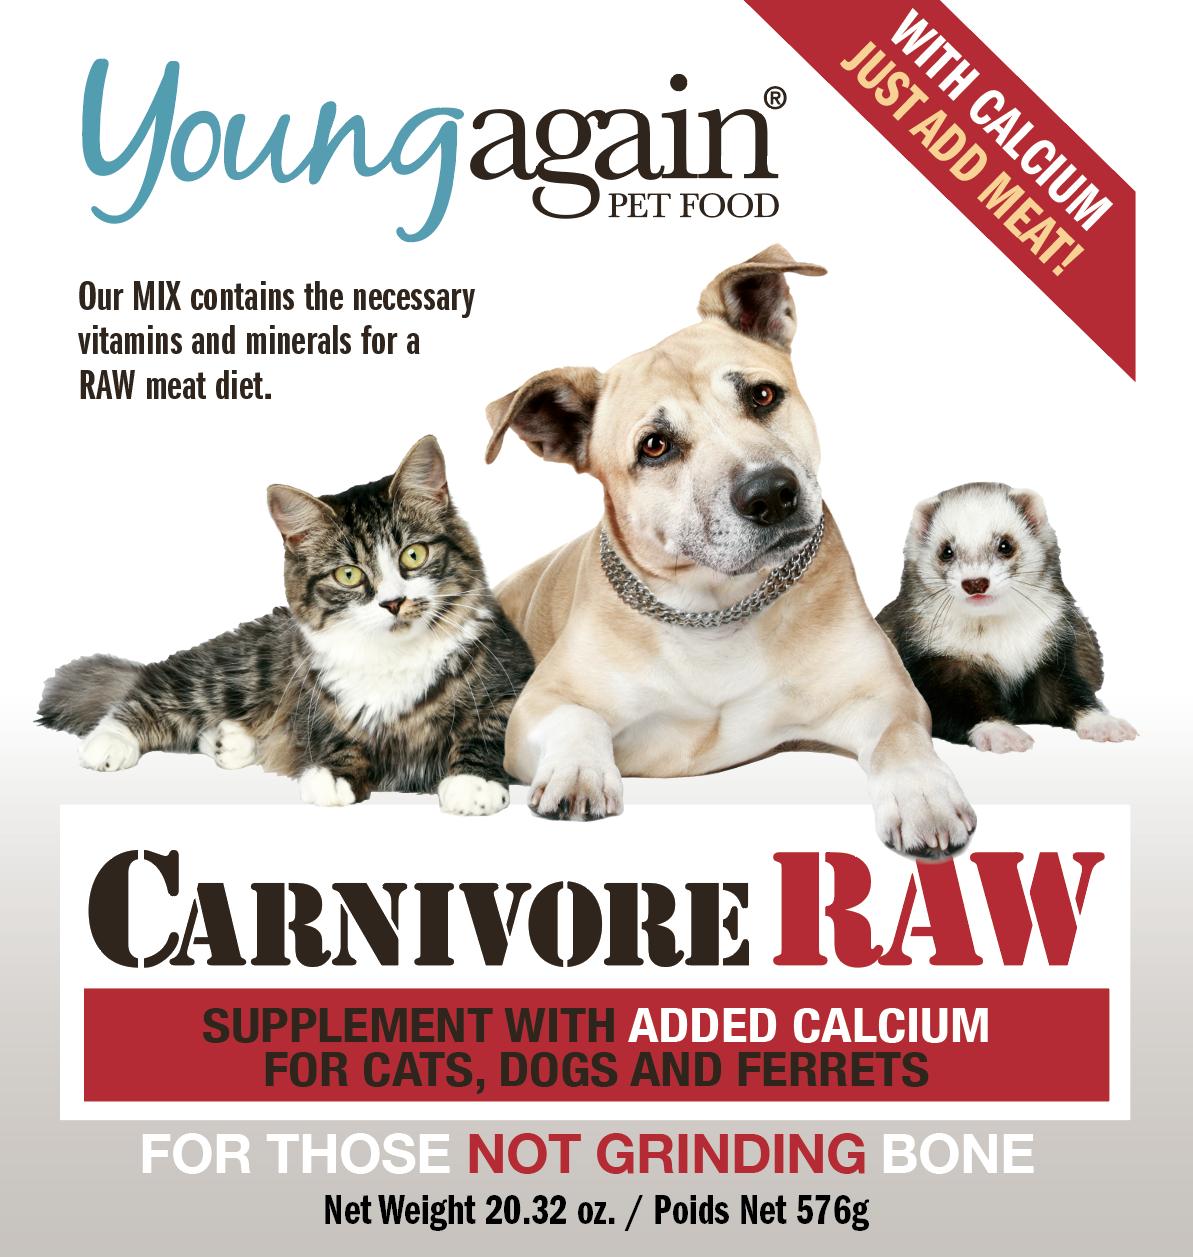 CarnivoreRAW with Calcium Young Again Pet Food